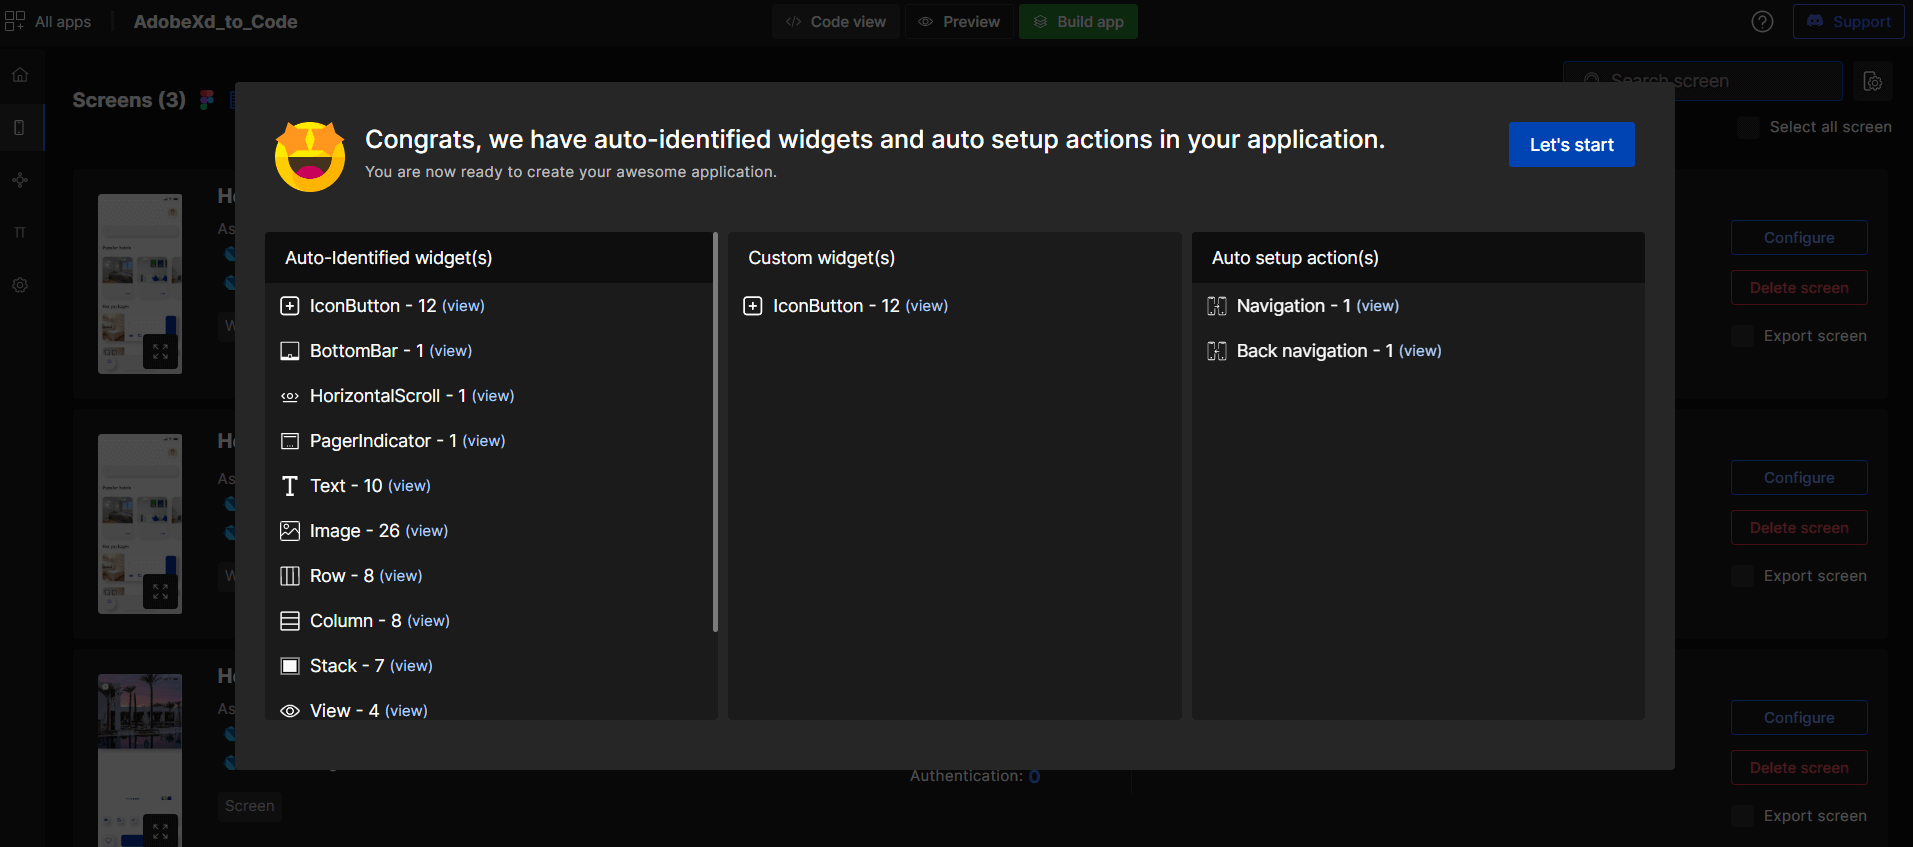 Auto-Identified widgets and actions